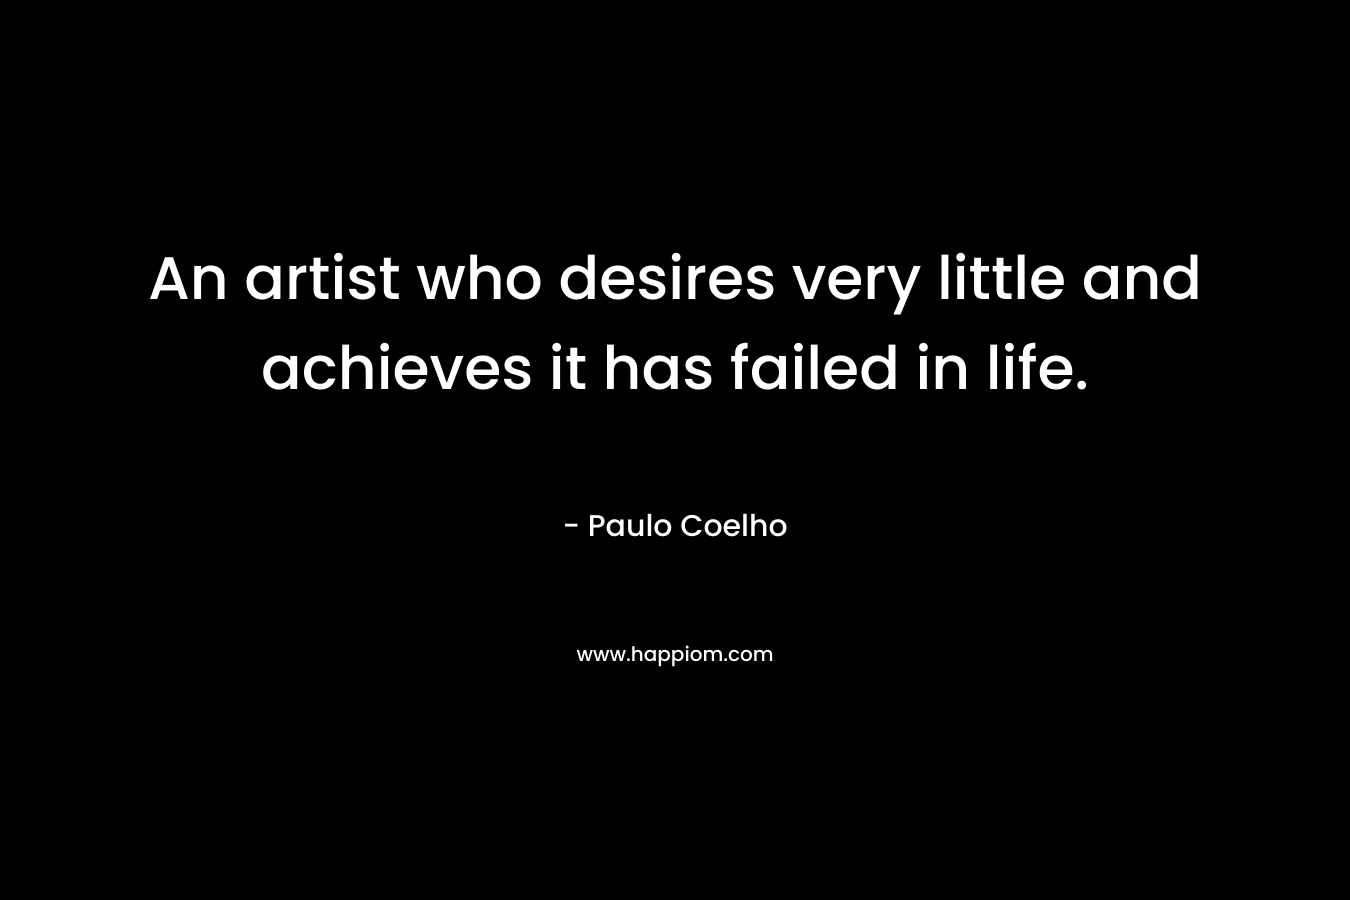 An artist who desires very little and achieves it has failed in life.